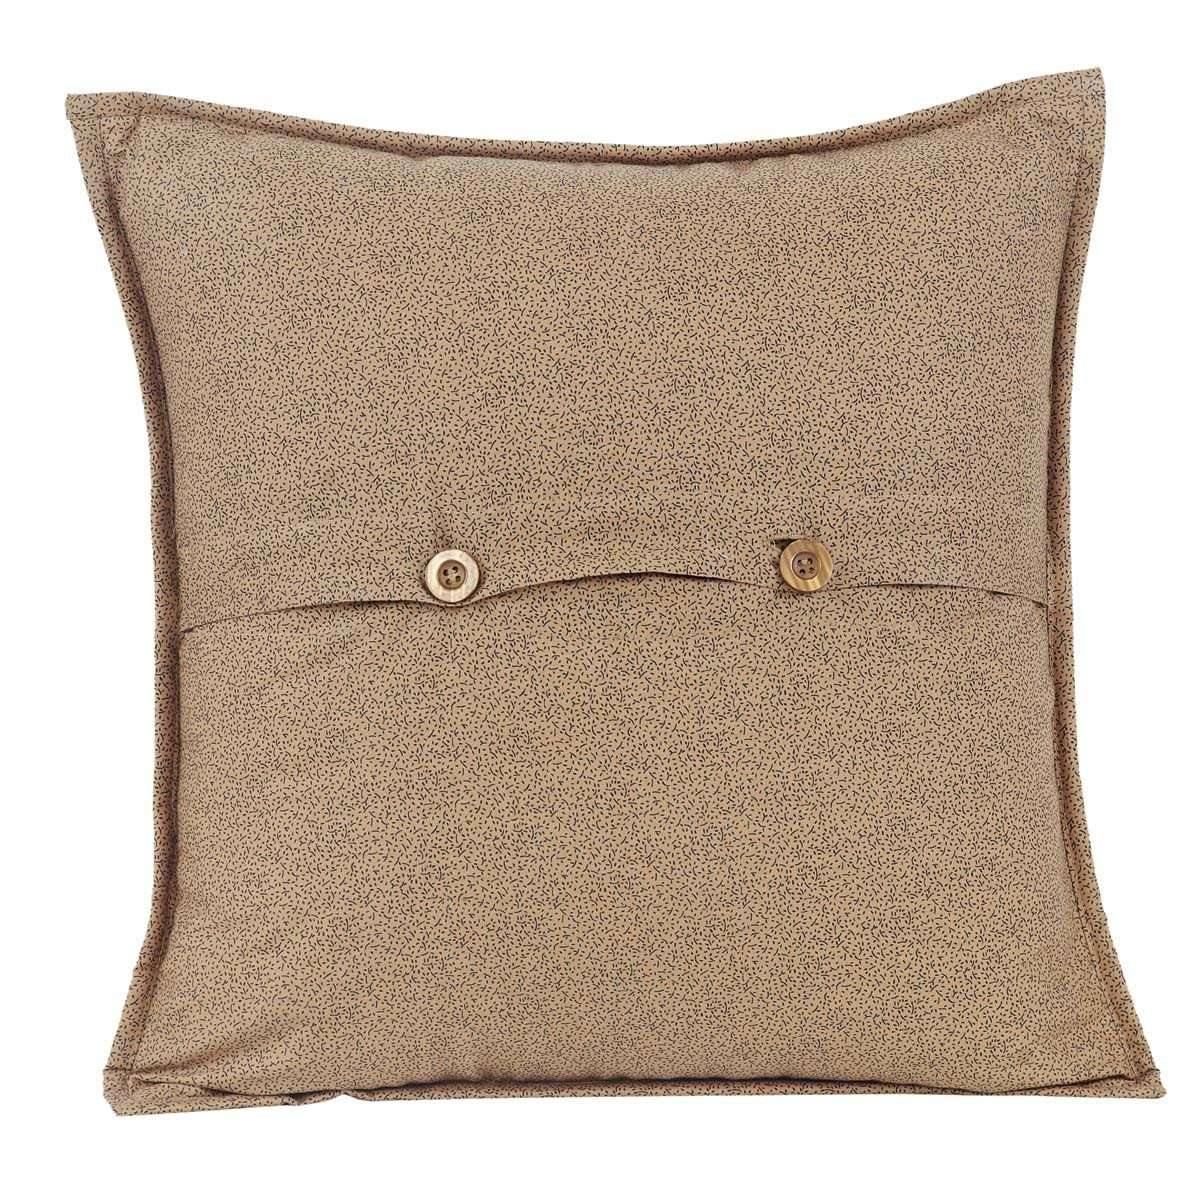 Millsboro Pillow Quilted 16x16 VHC Brands back